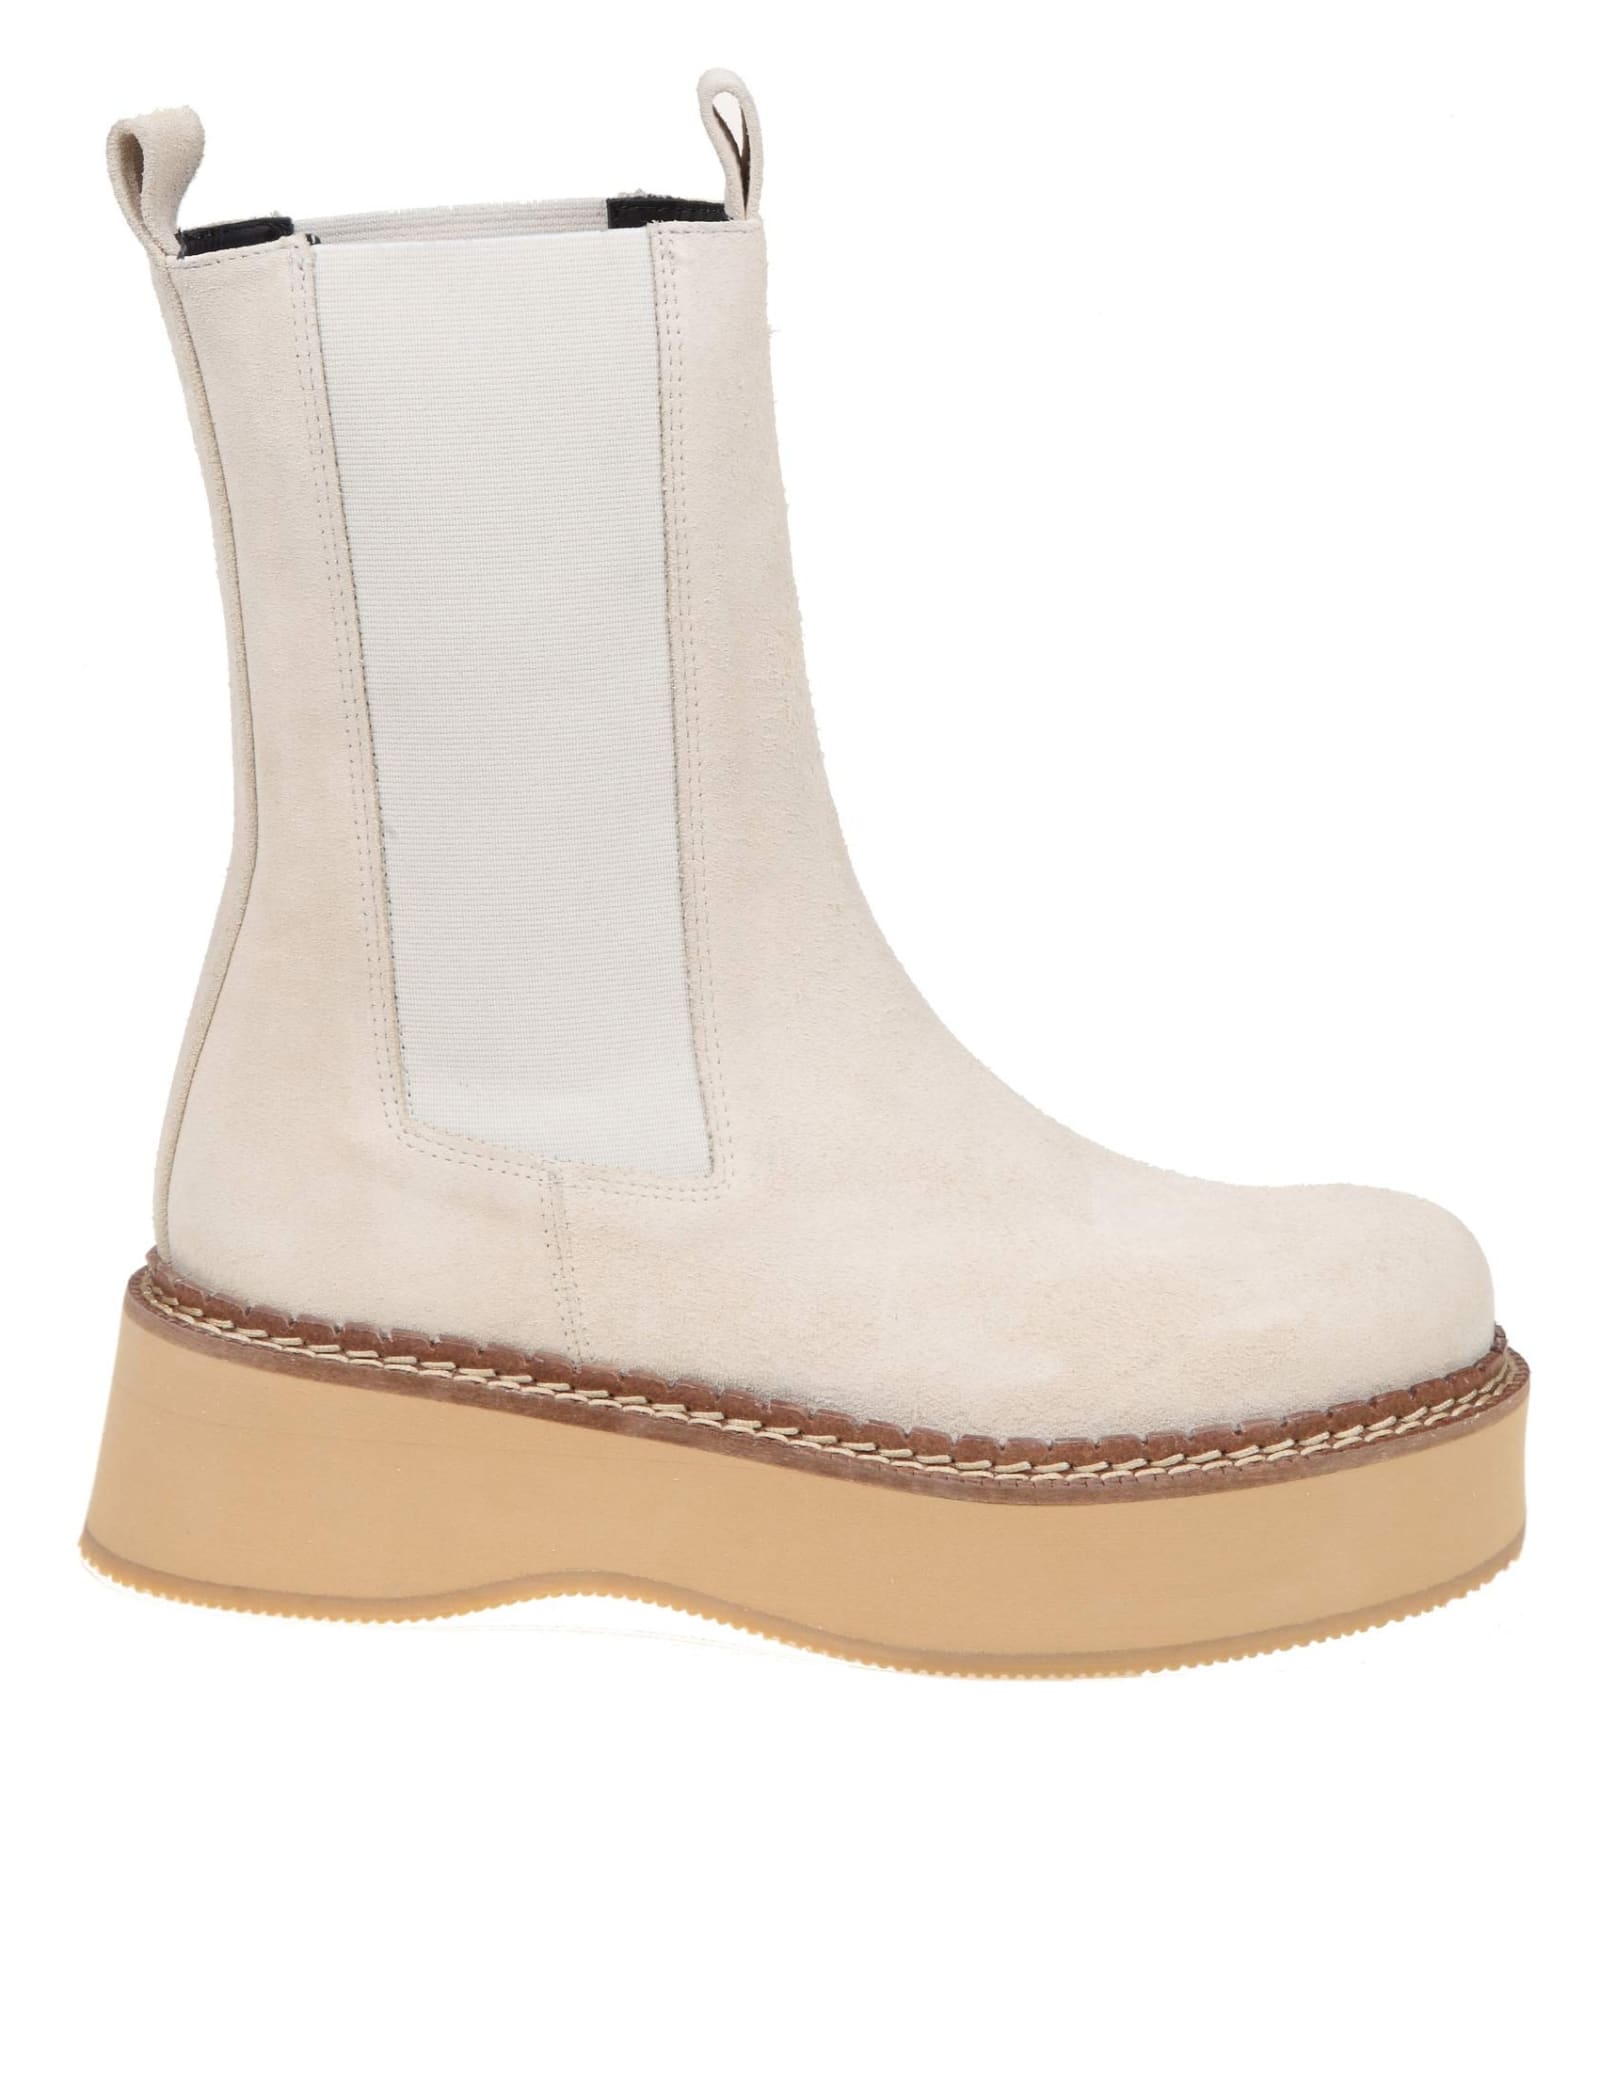 Paloma Barceló Paloma Barcelo Eerin Ankle Boot In Ivory Suede